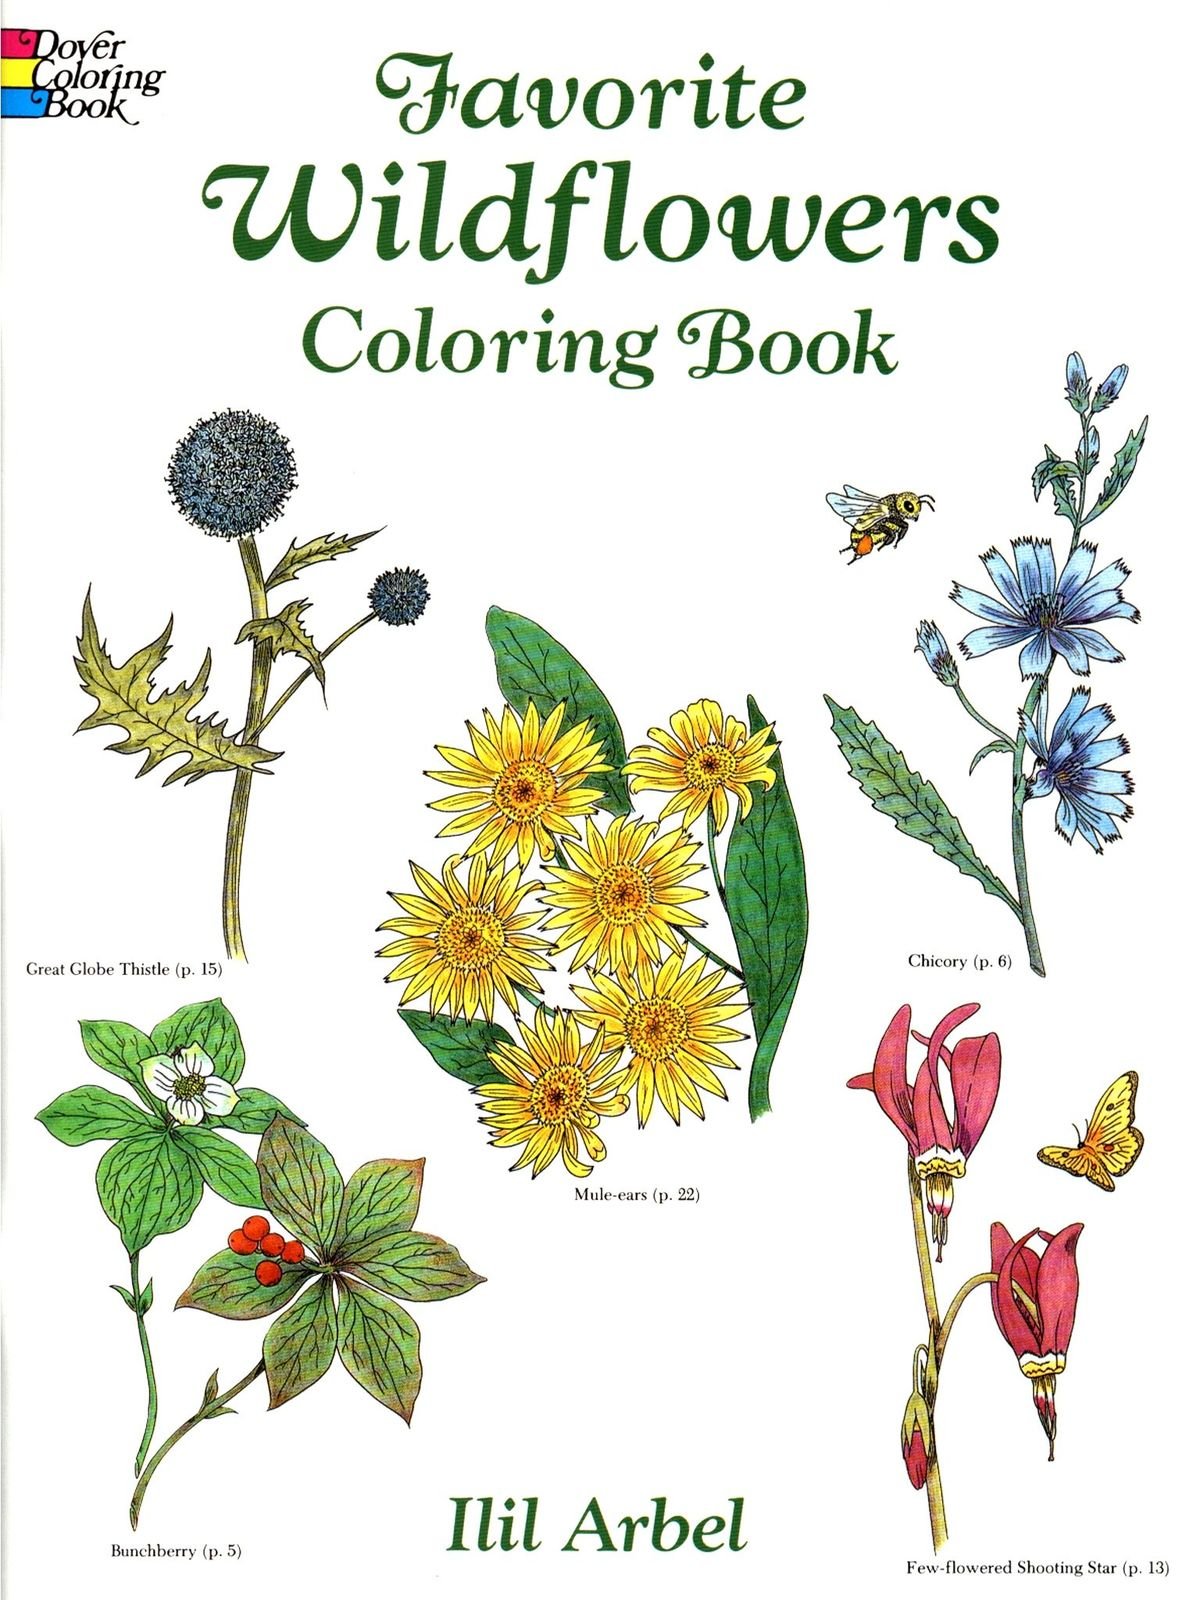 Dover - Favorite Wildflowers Coloring Book